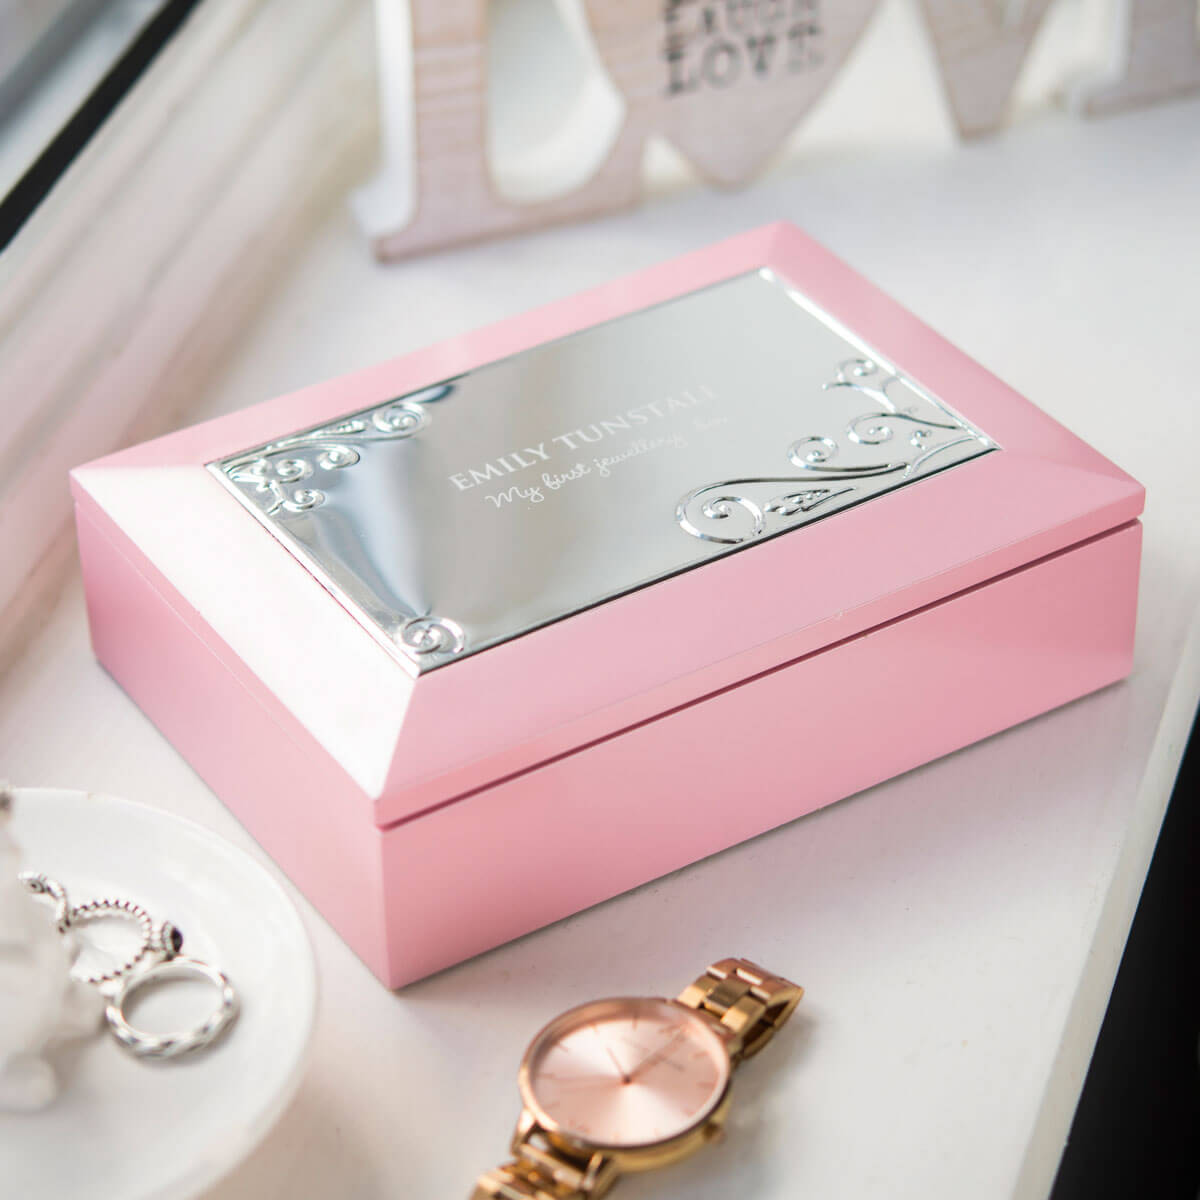 gifts for girlfriend on valentine's day:A pink jewelry box sitting on top of a table
